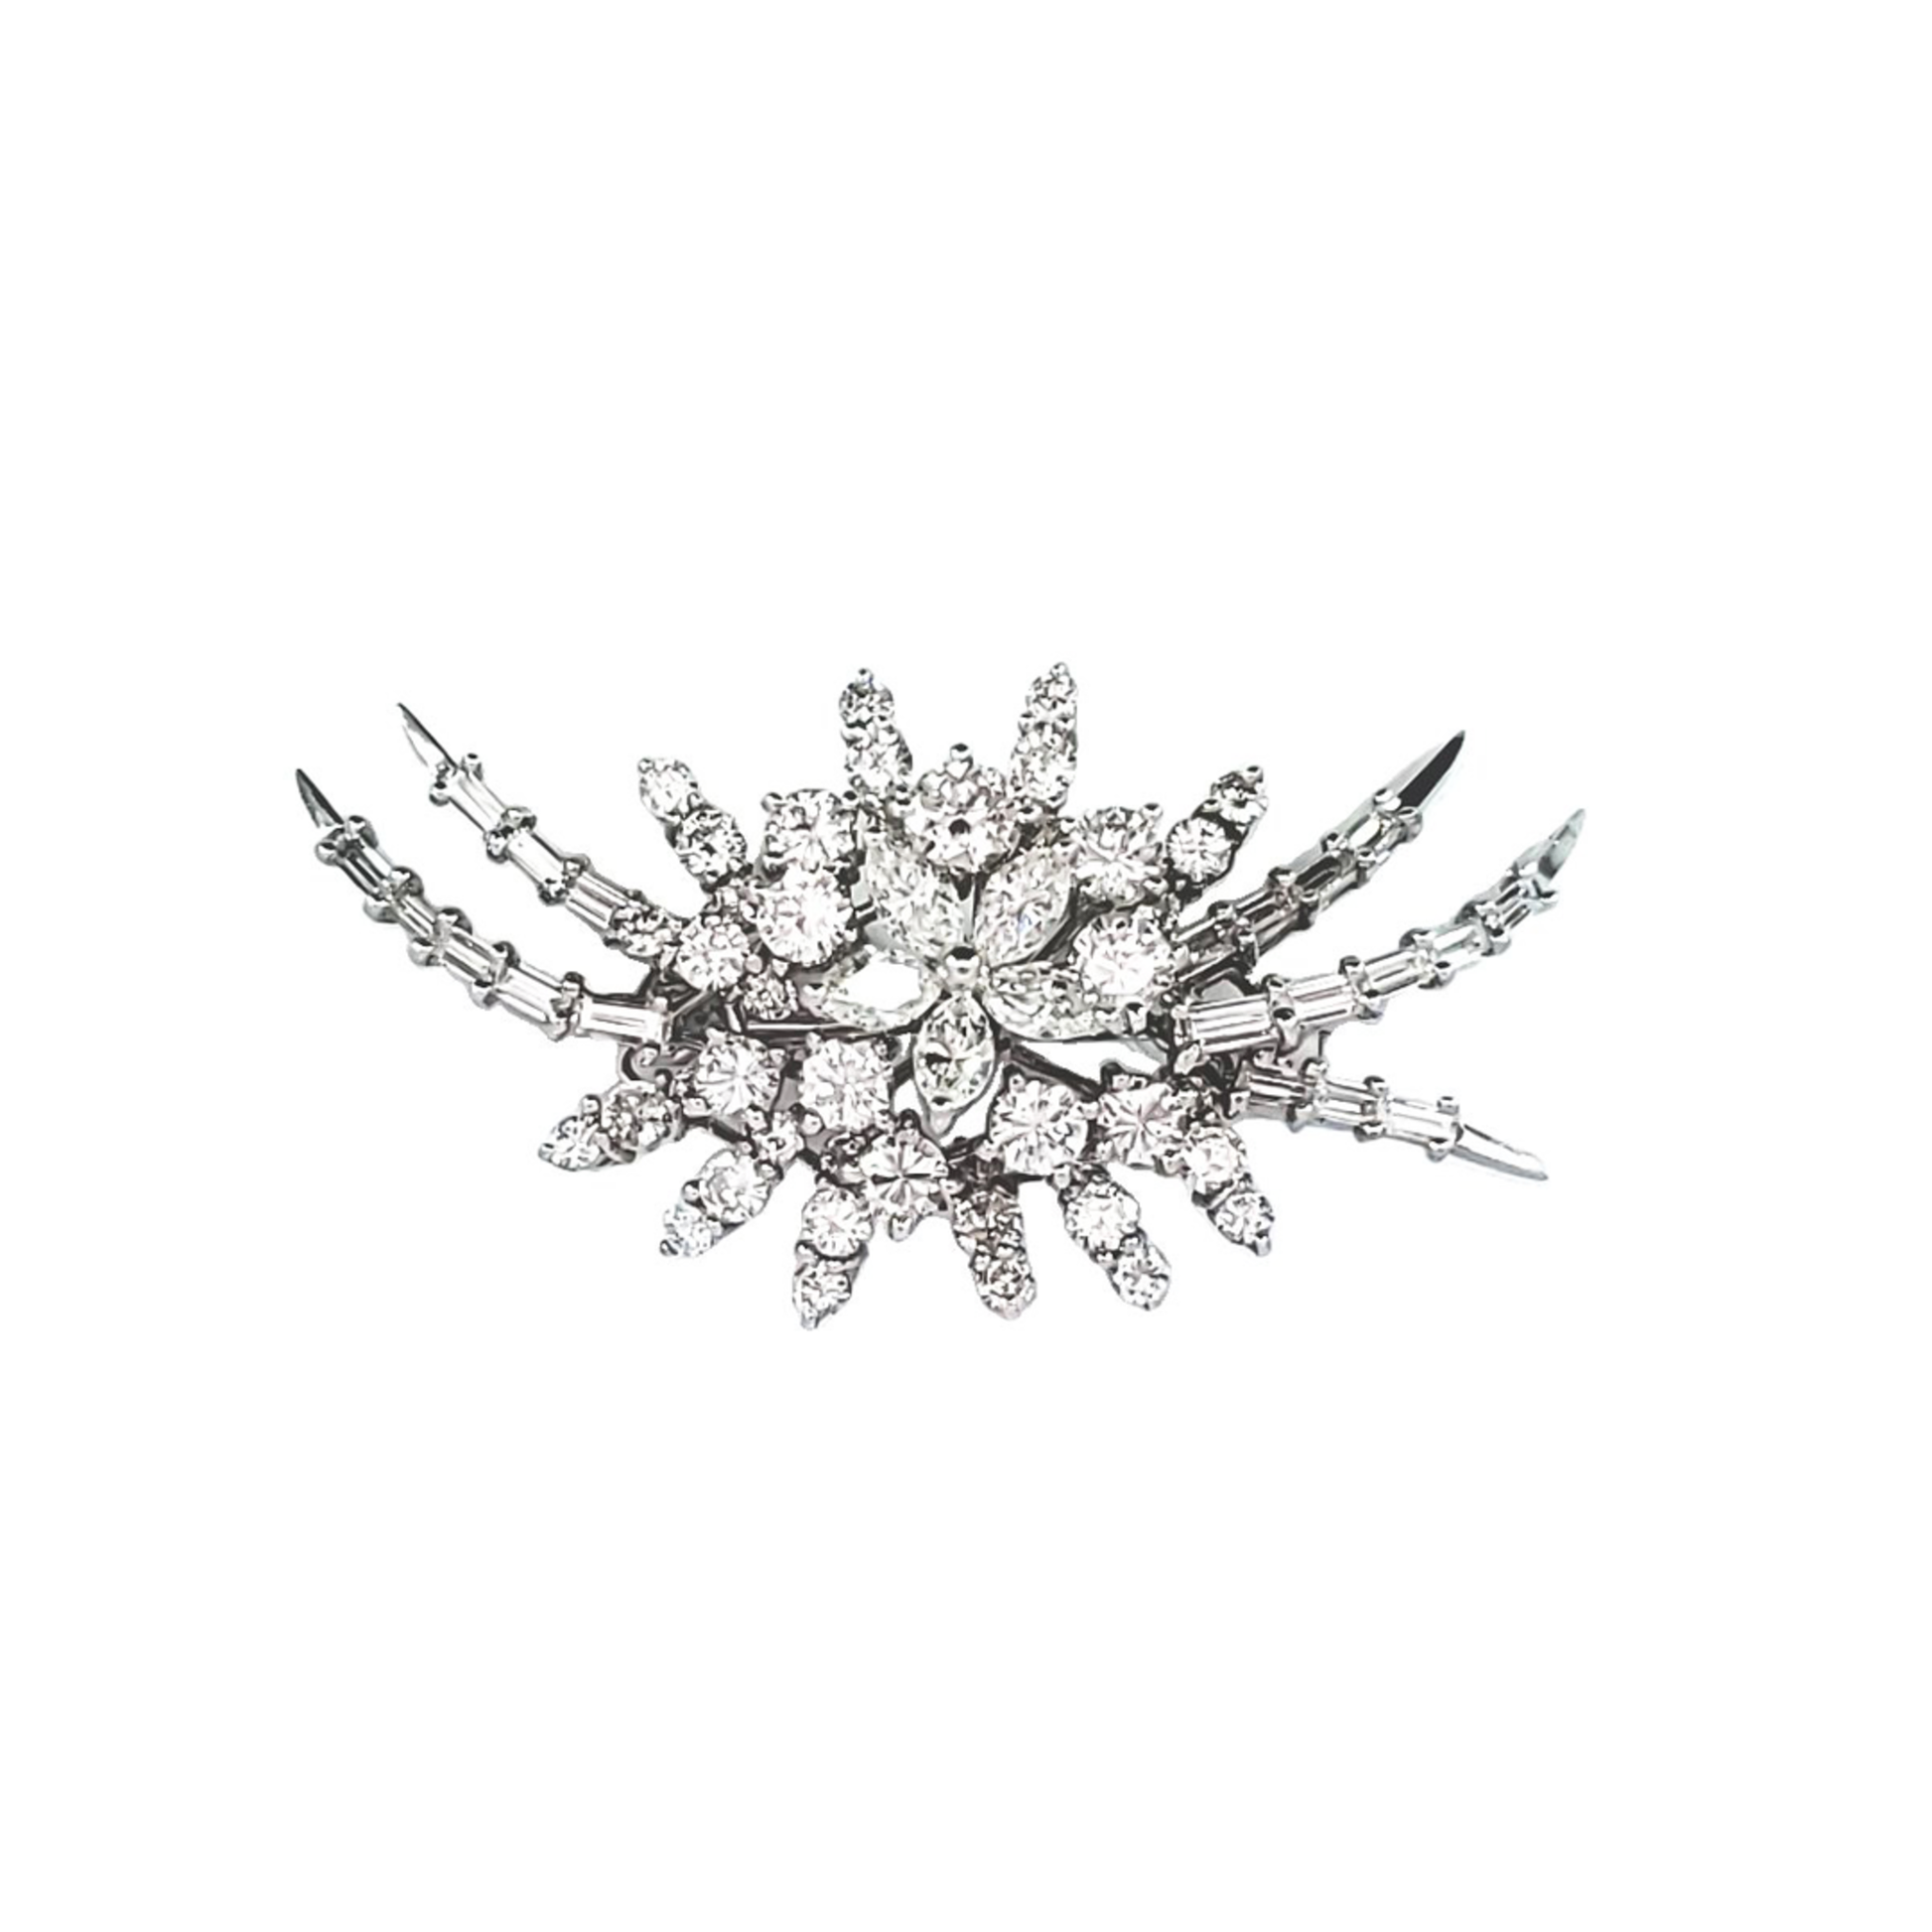 1970s 14KT White Gold Diamond Brooch front